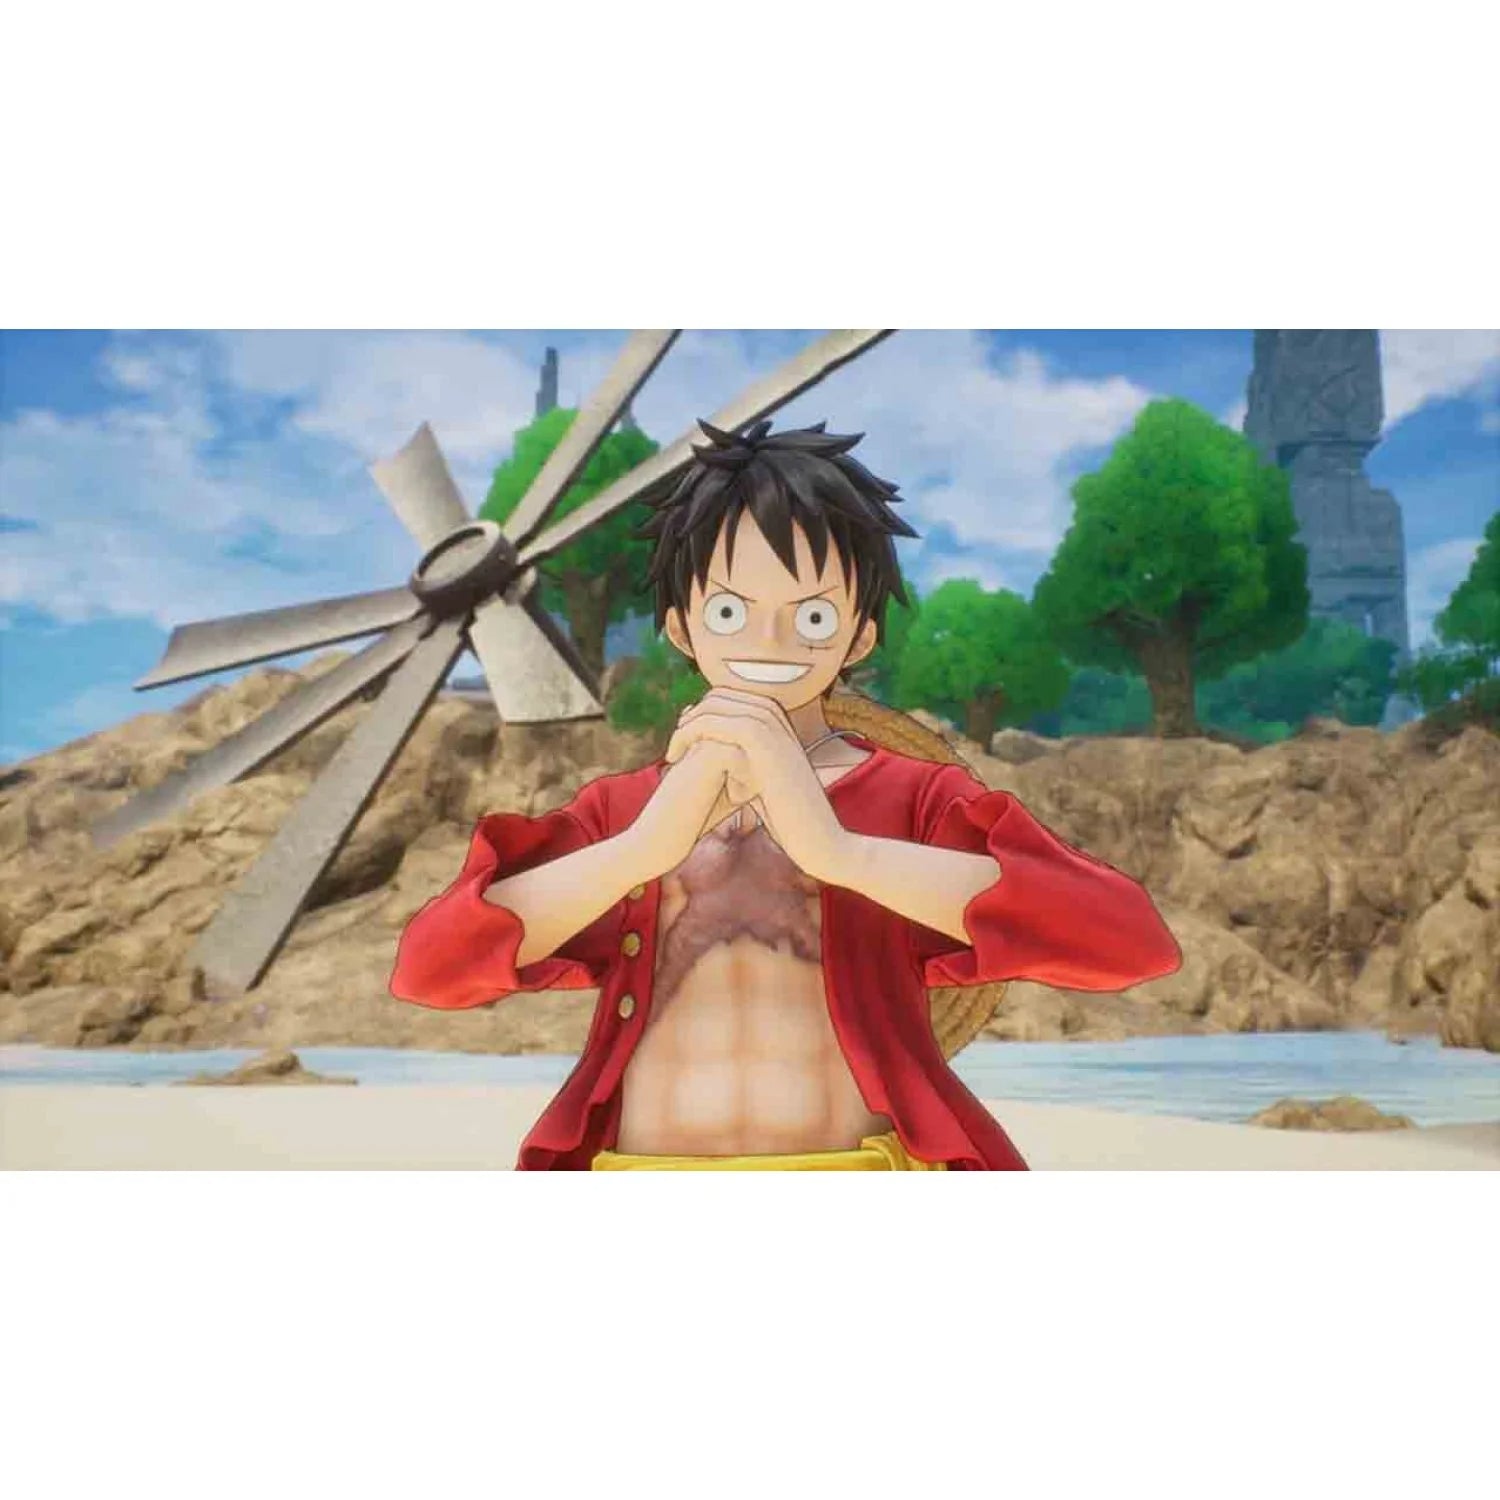 One Piece Odyssey, PS4 - PS4 Pro - PS5